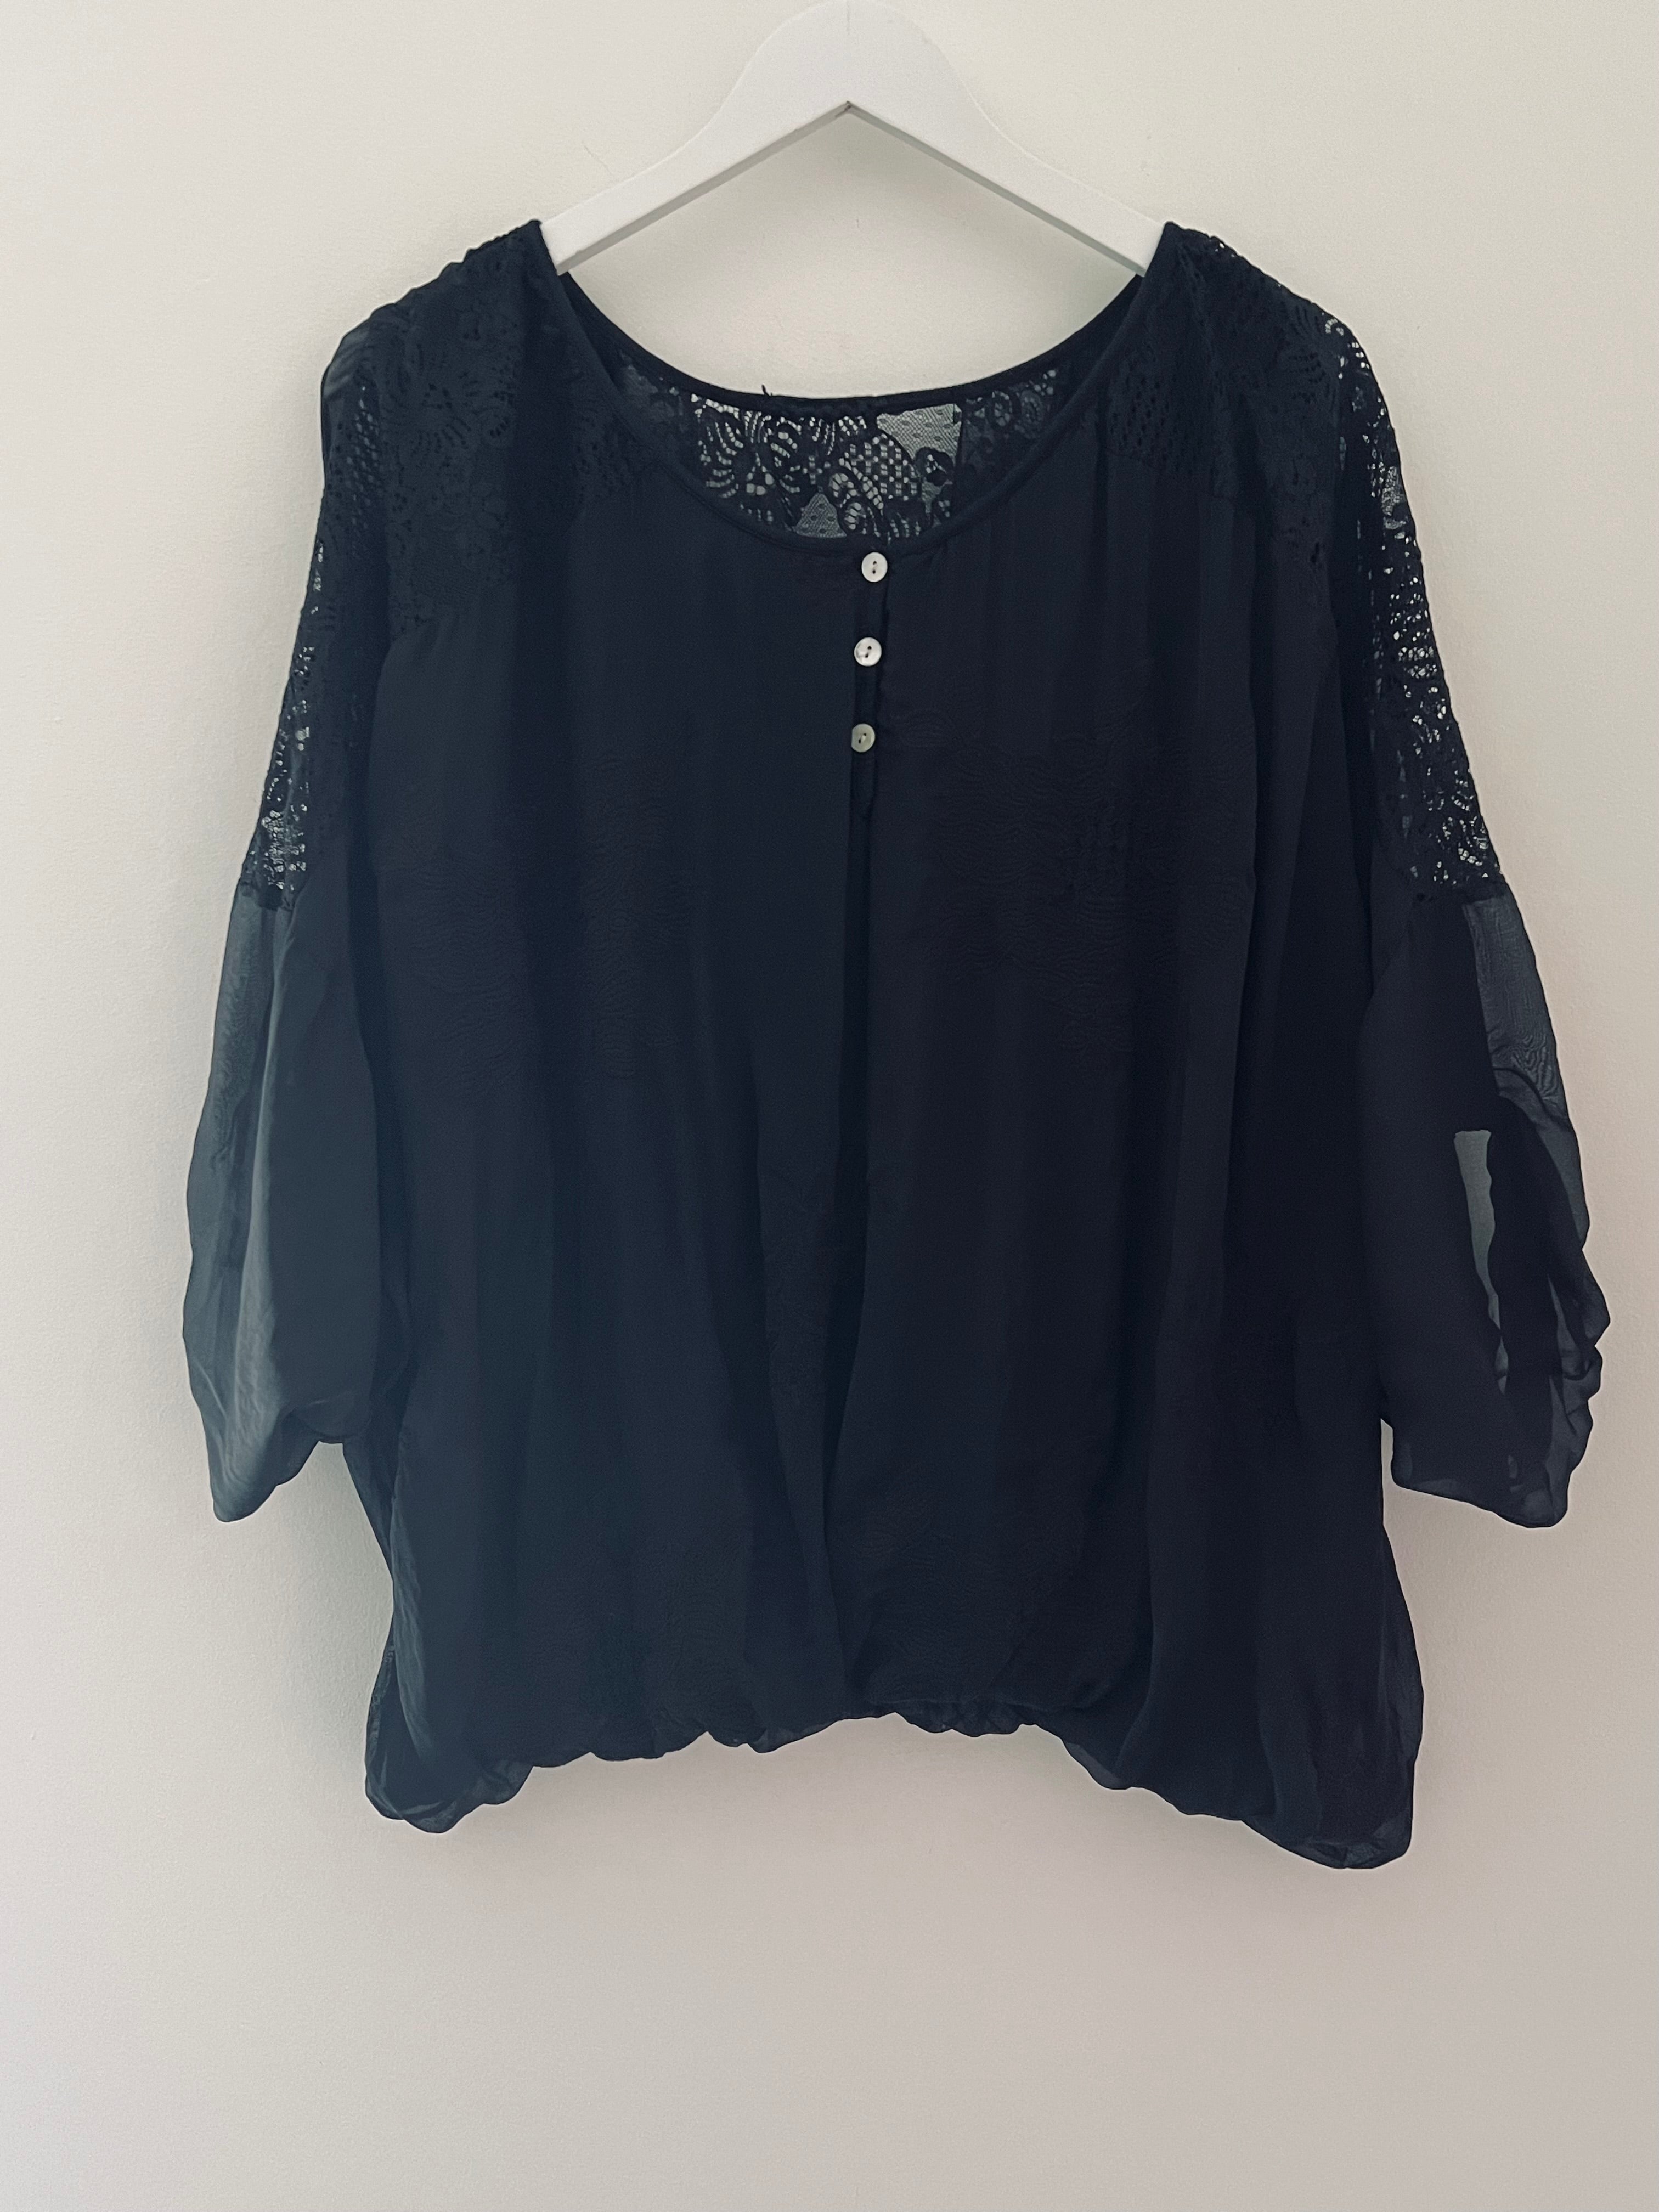 Silk Blouse with Embroidered Flowers in Black